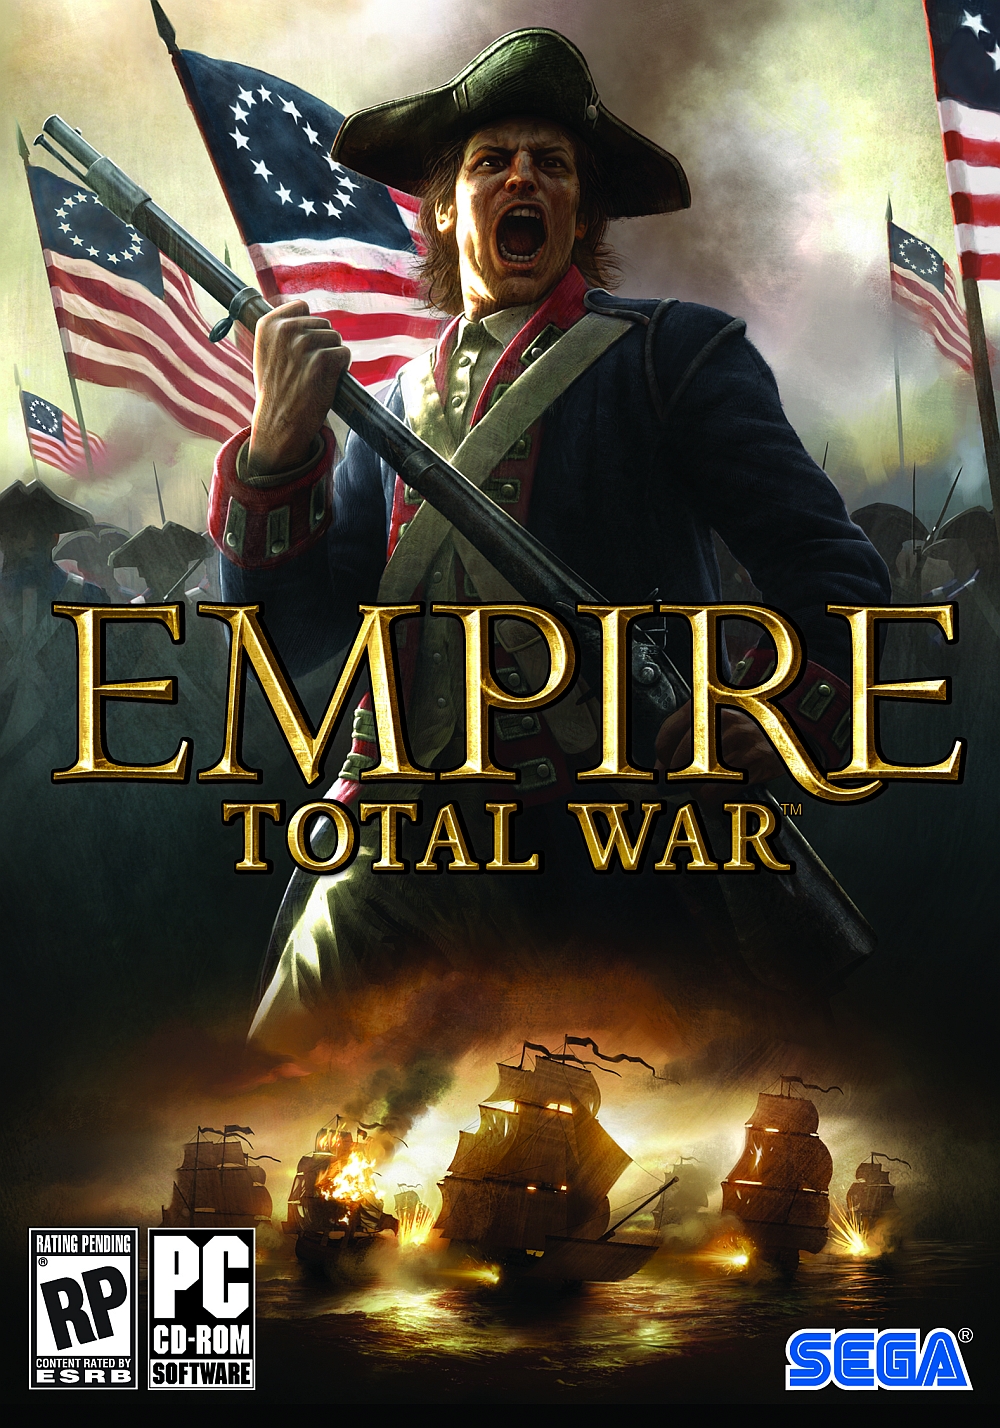 Empire: Total War Screenshots, Pictures, Wallpapers - PC - IGN